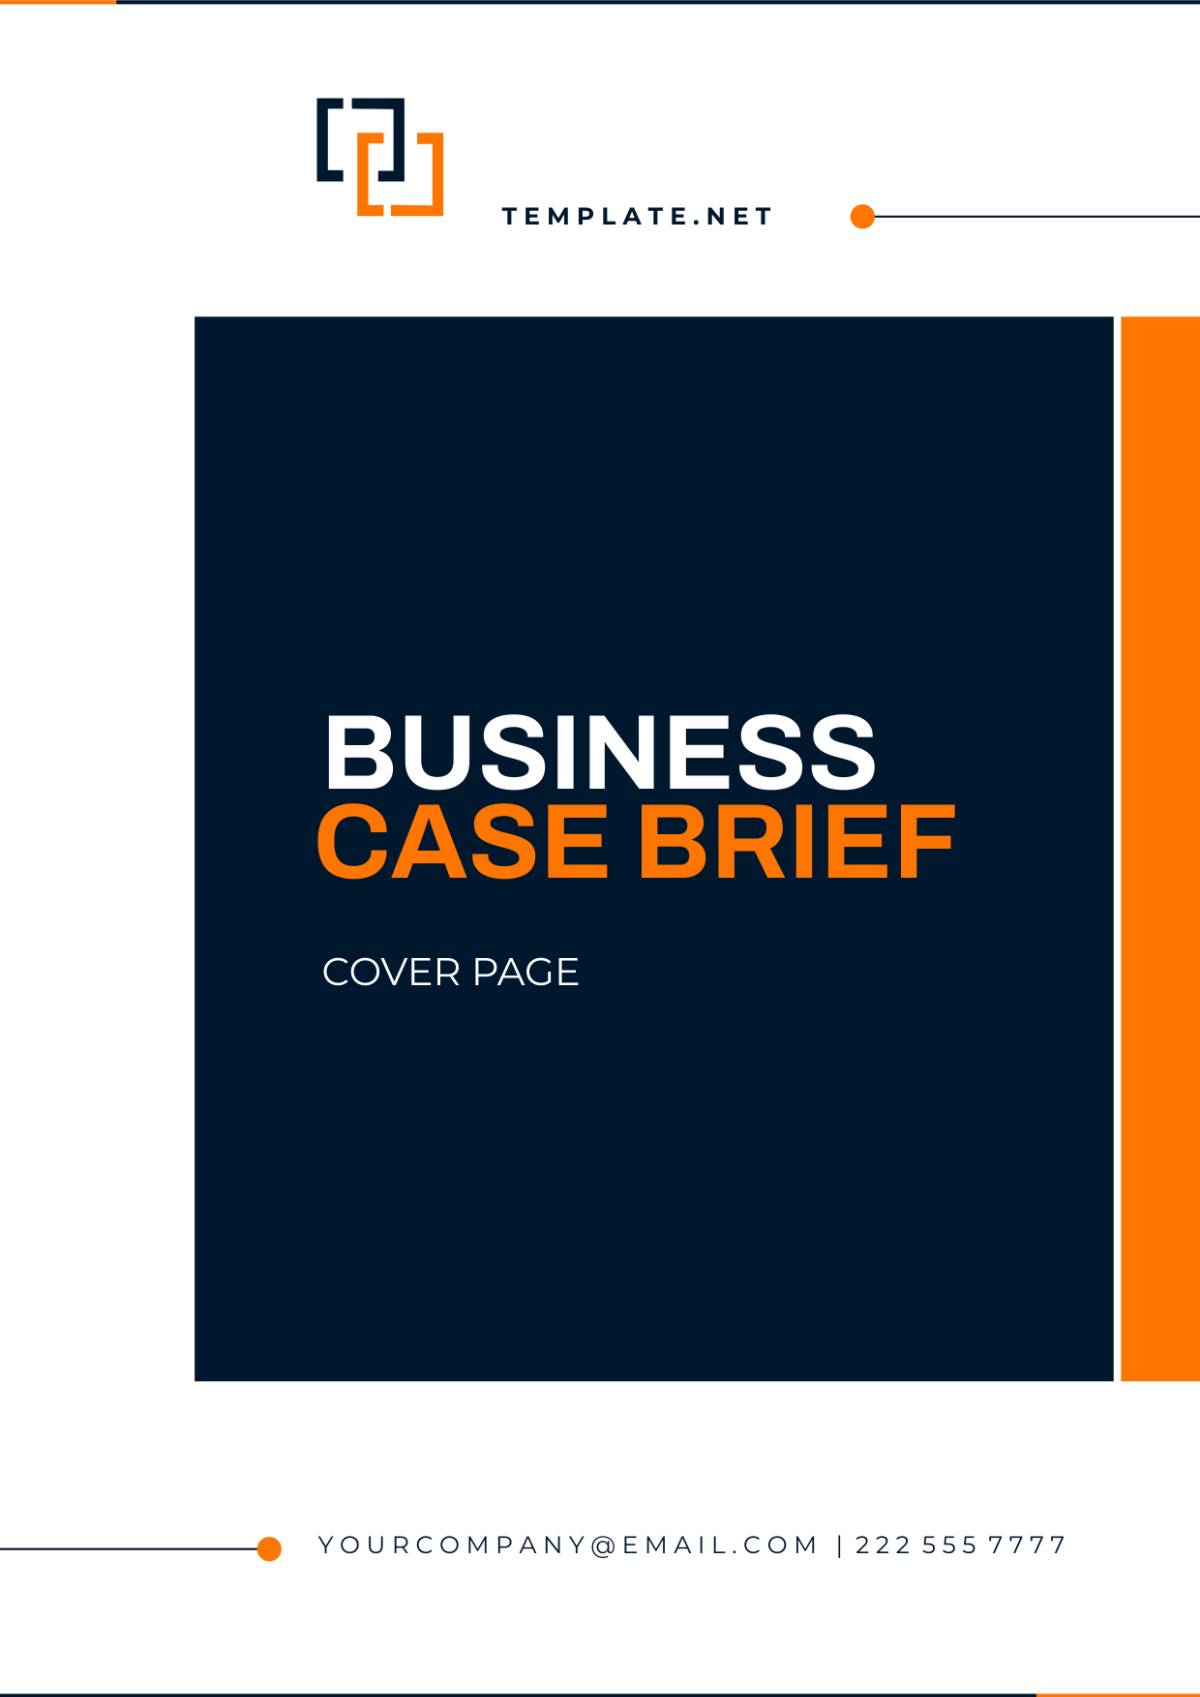 Business Case Brief Cover Page